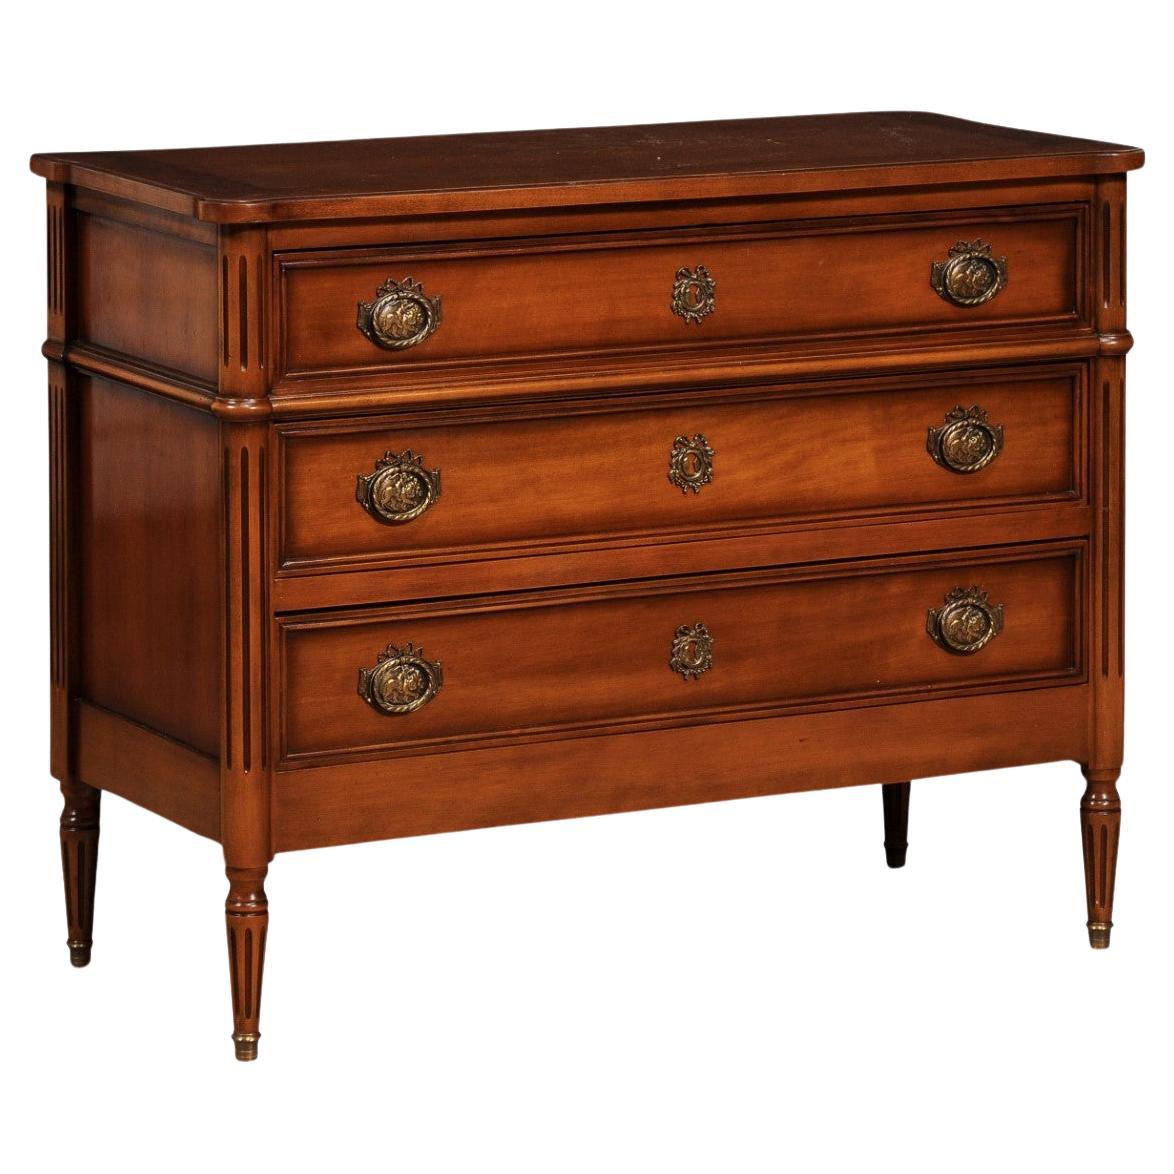 French Louis XVI Style Light Walnut Commode with Three Drawers and Fluted Motifs